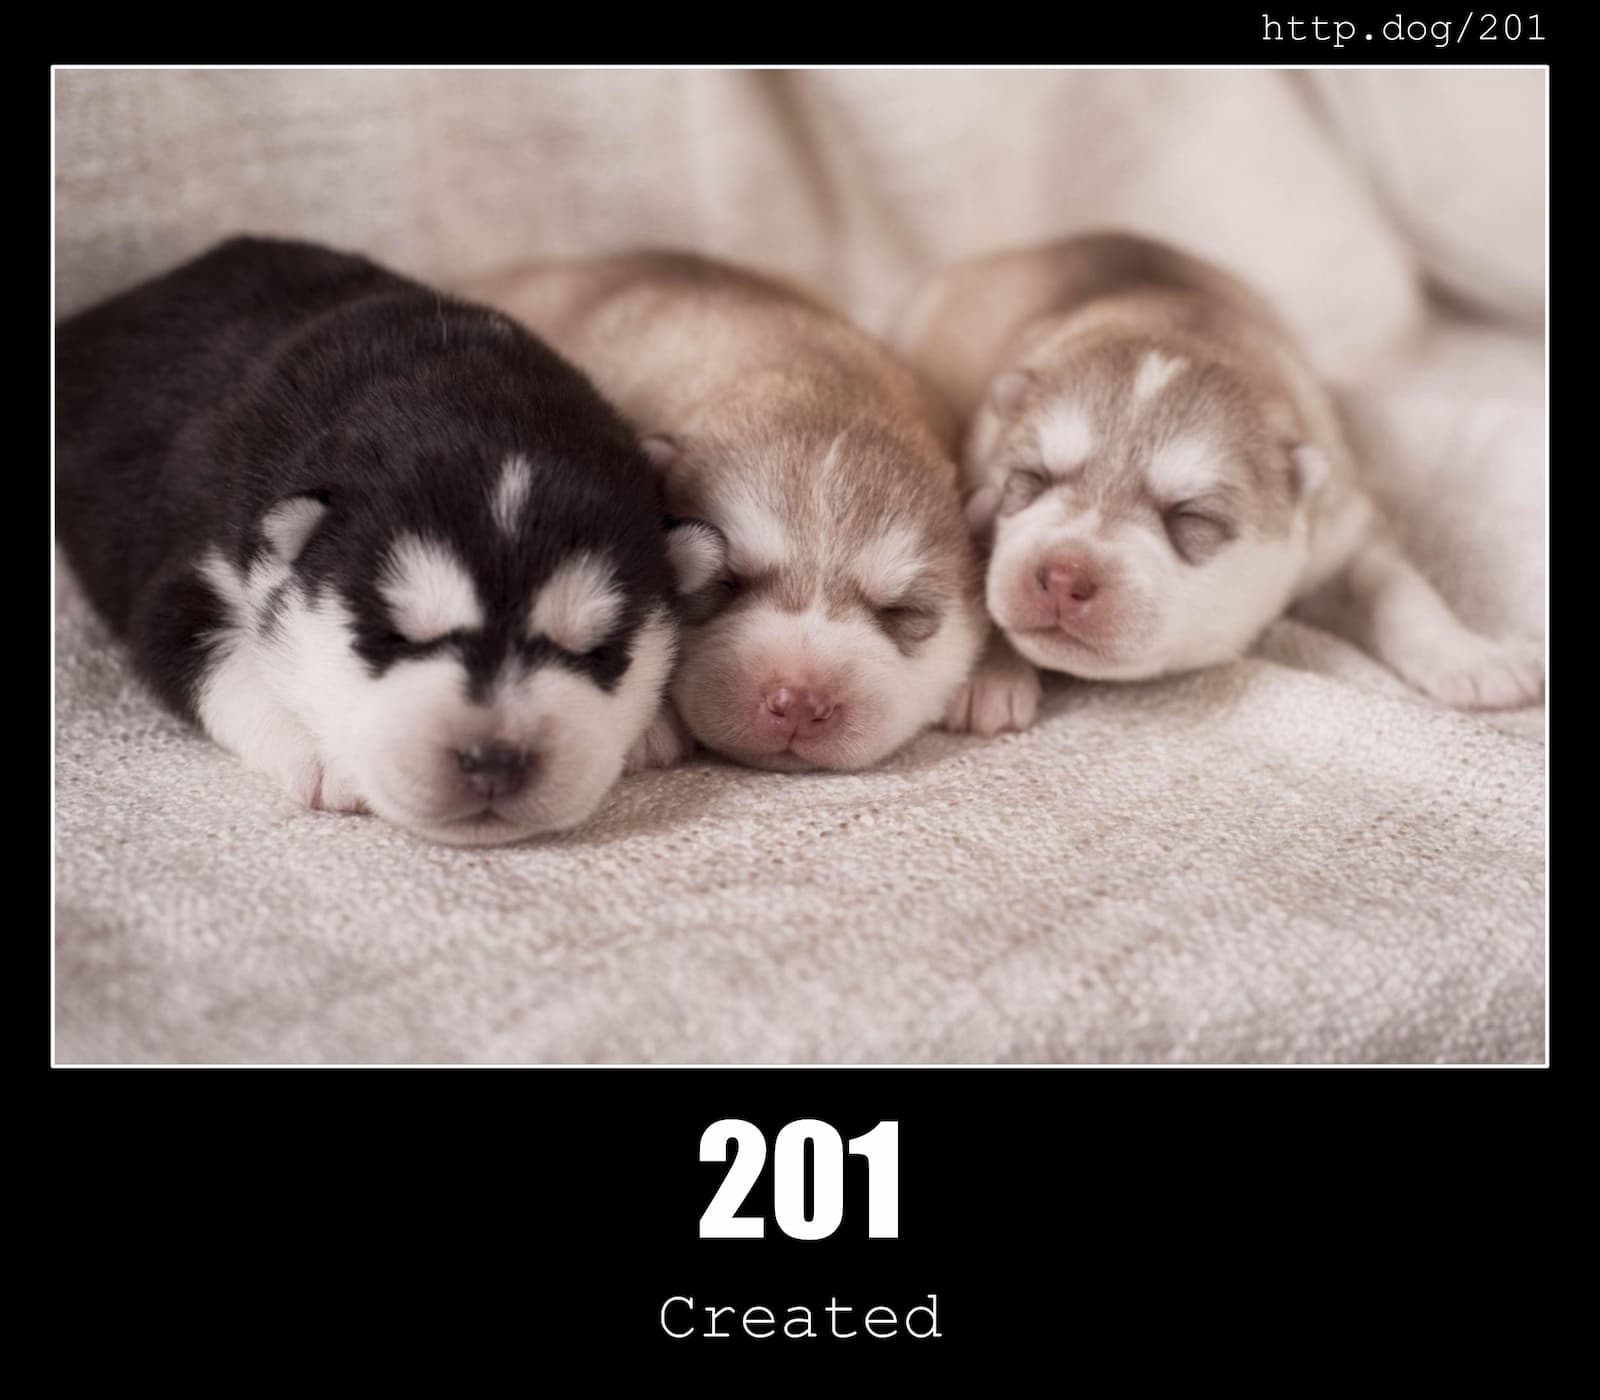 HTTP Status Code 201 Created & Dogs